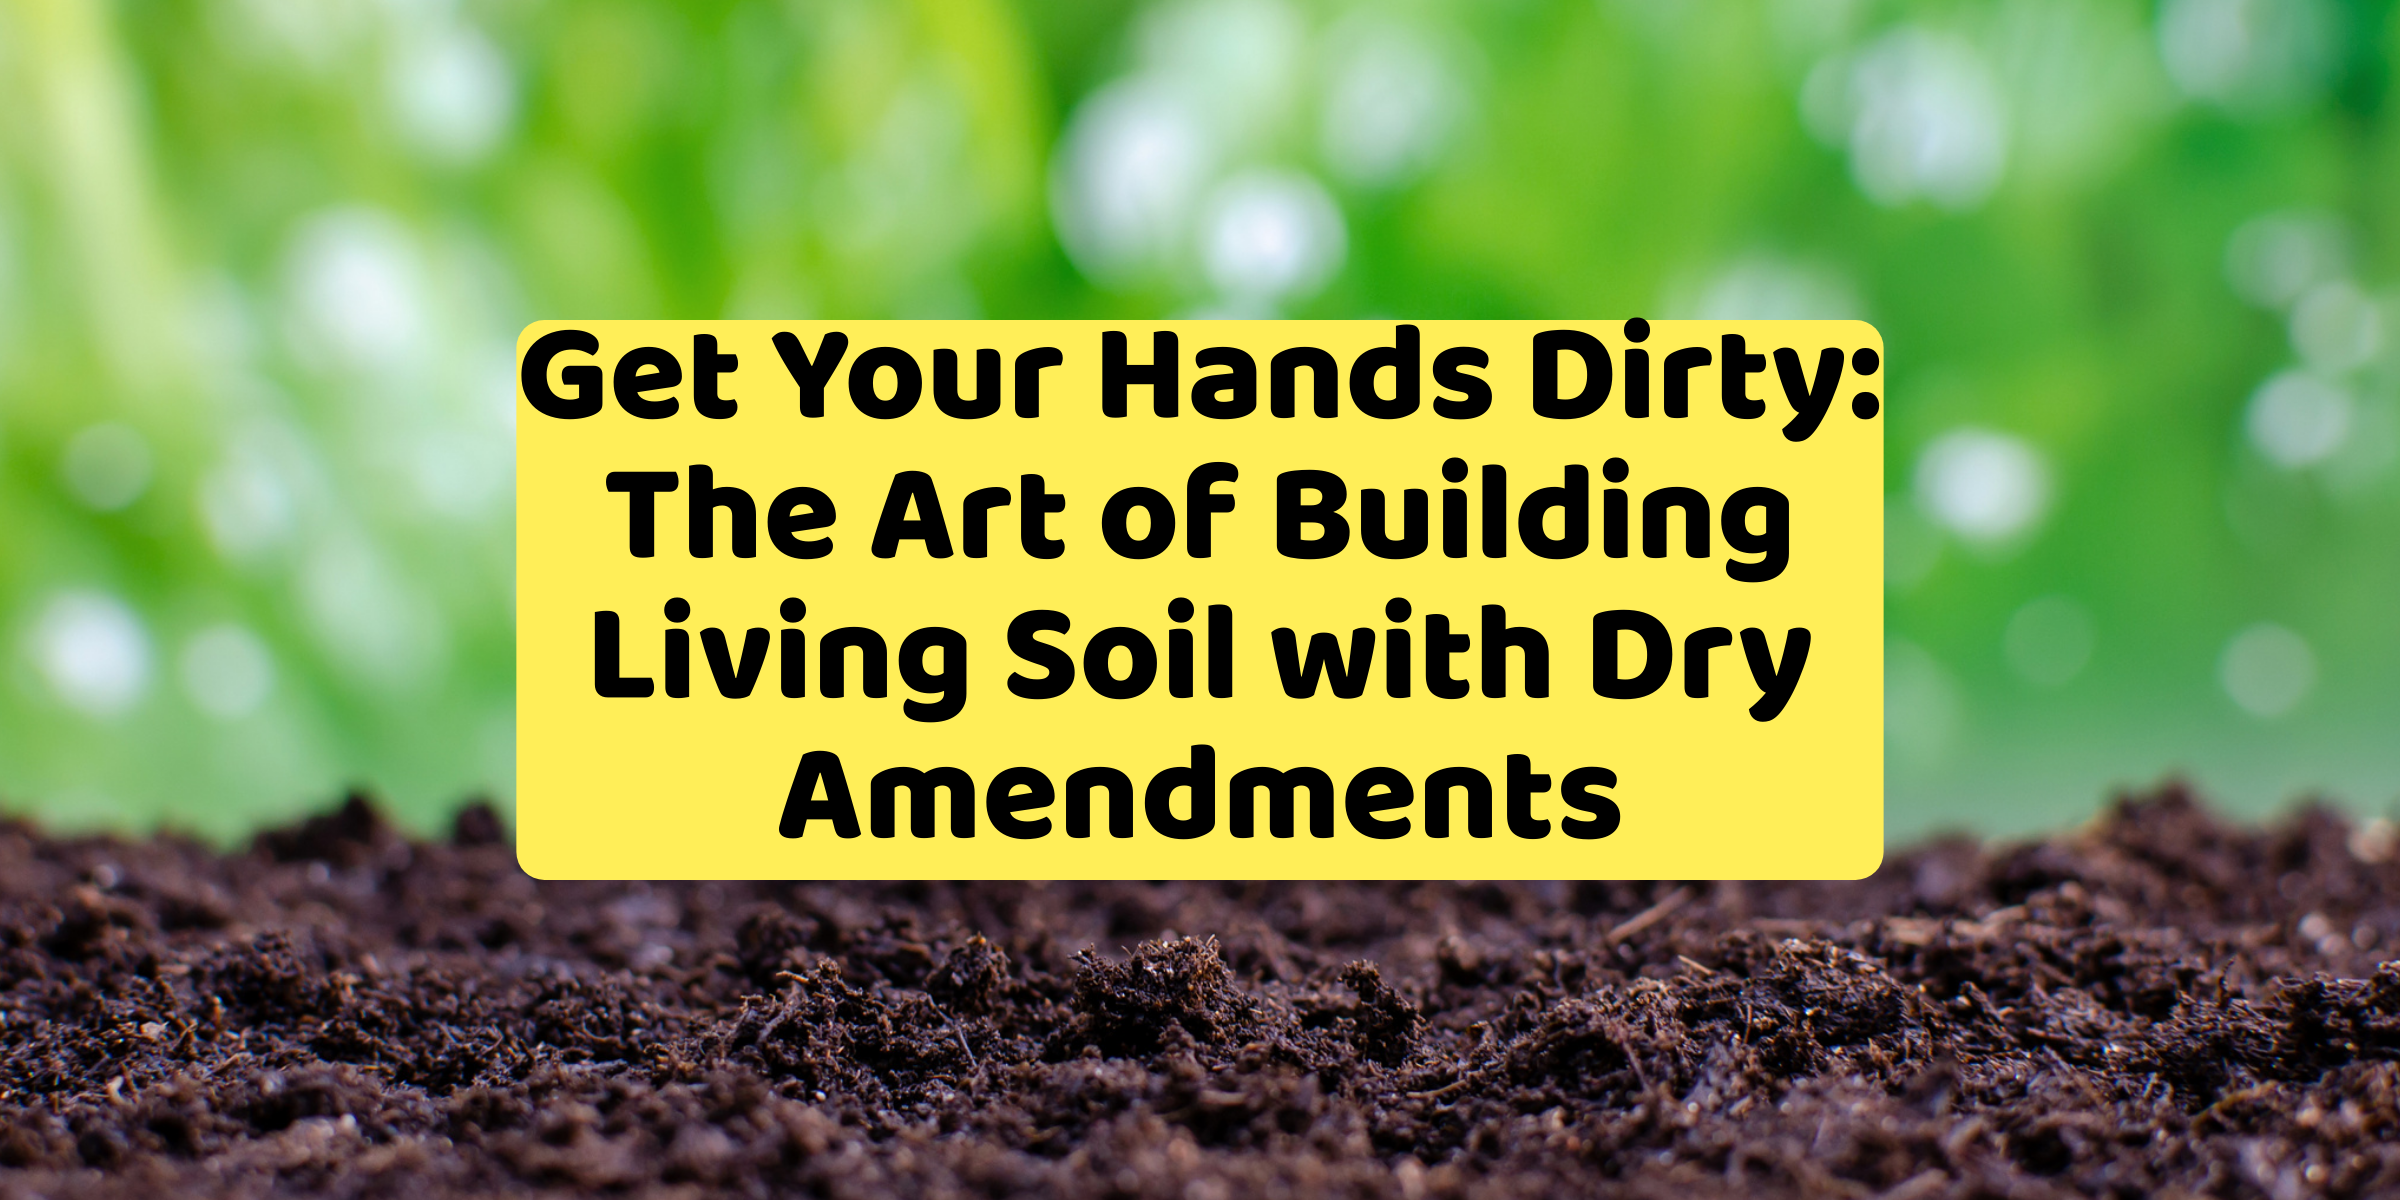 Get Your Hands Dirty: The Art of Building Living Soil with Dry Amendments